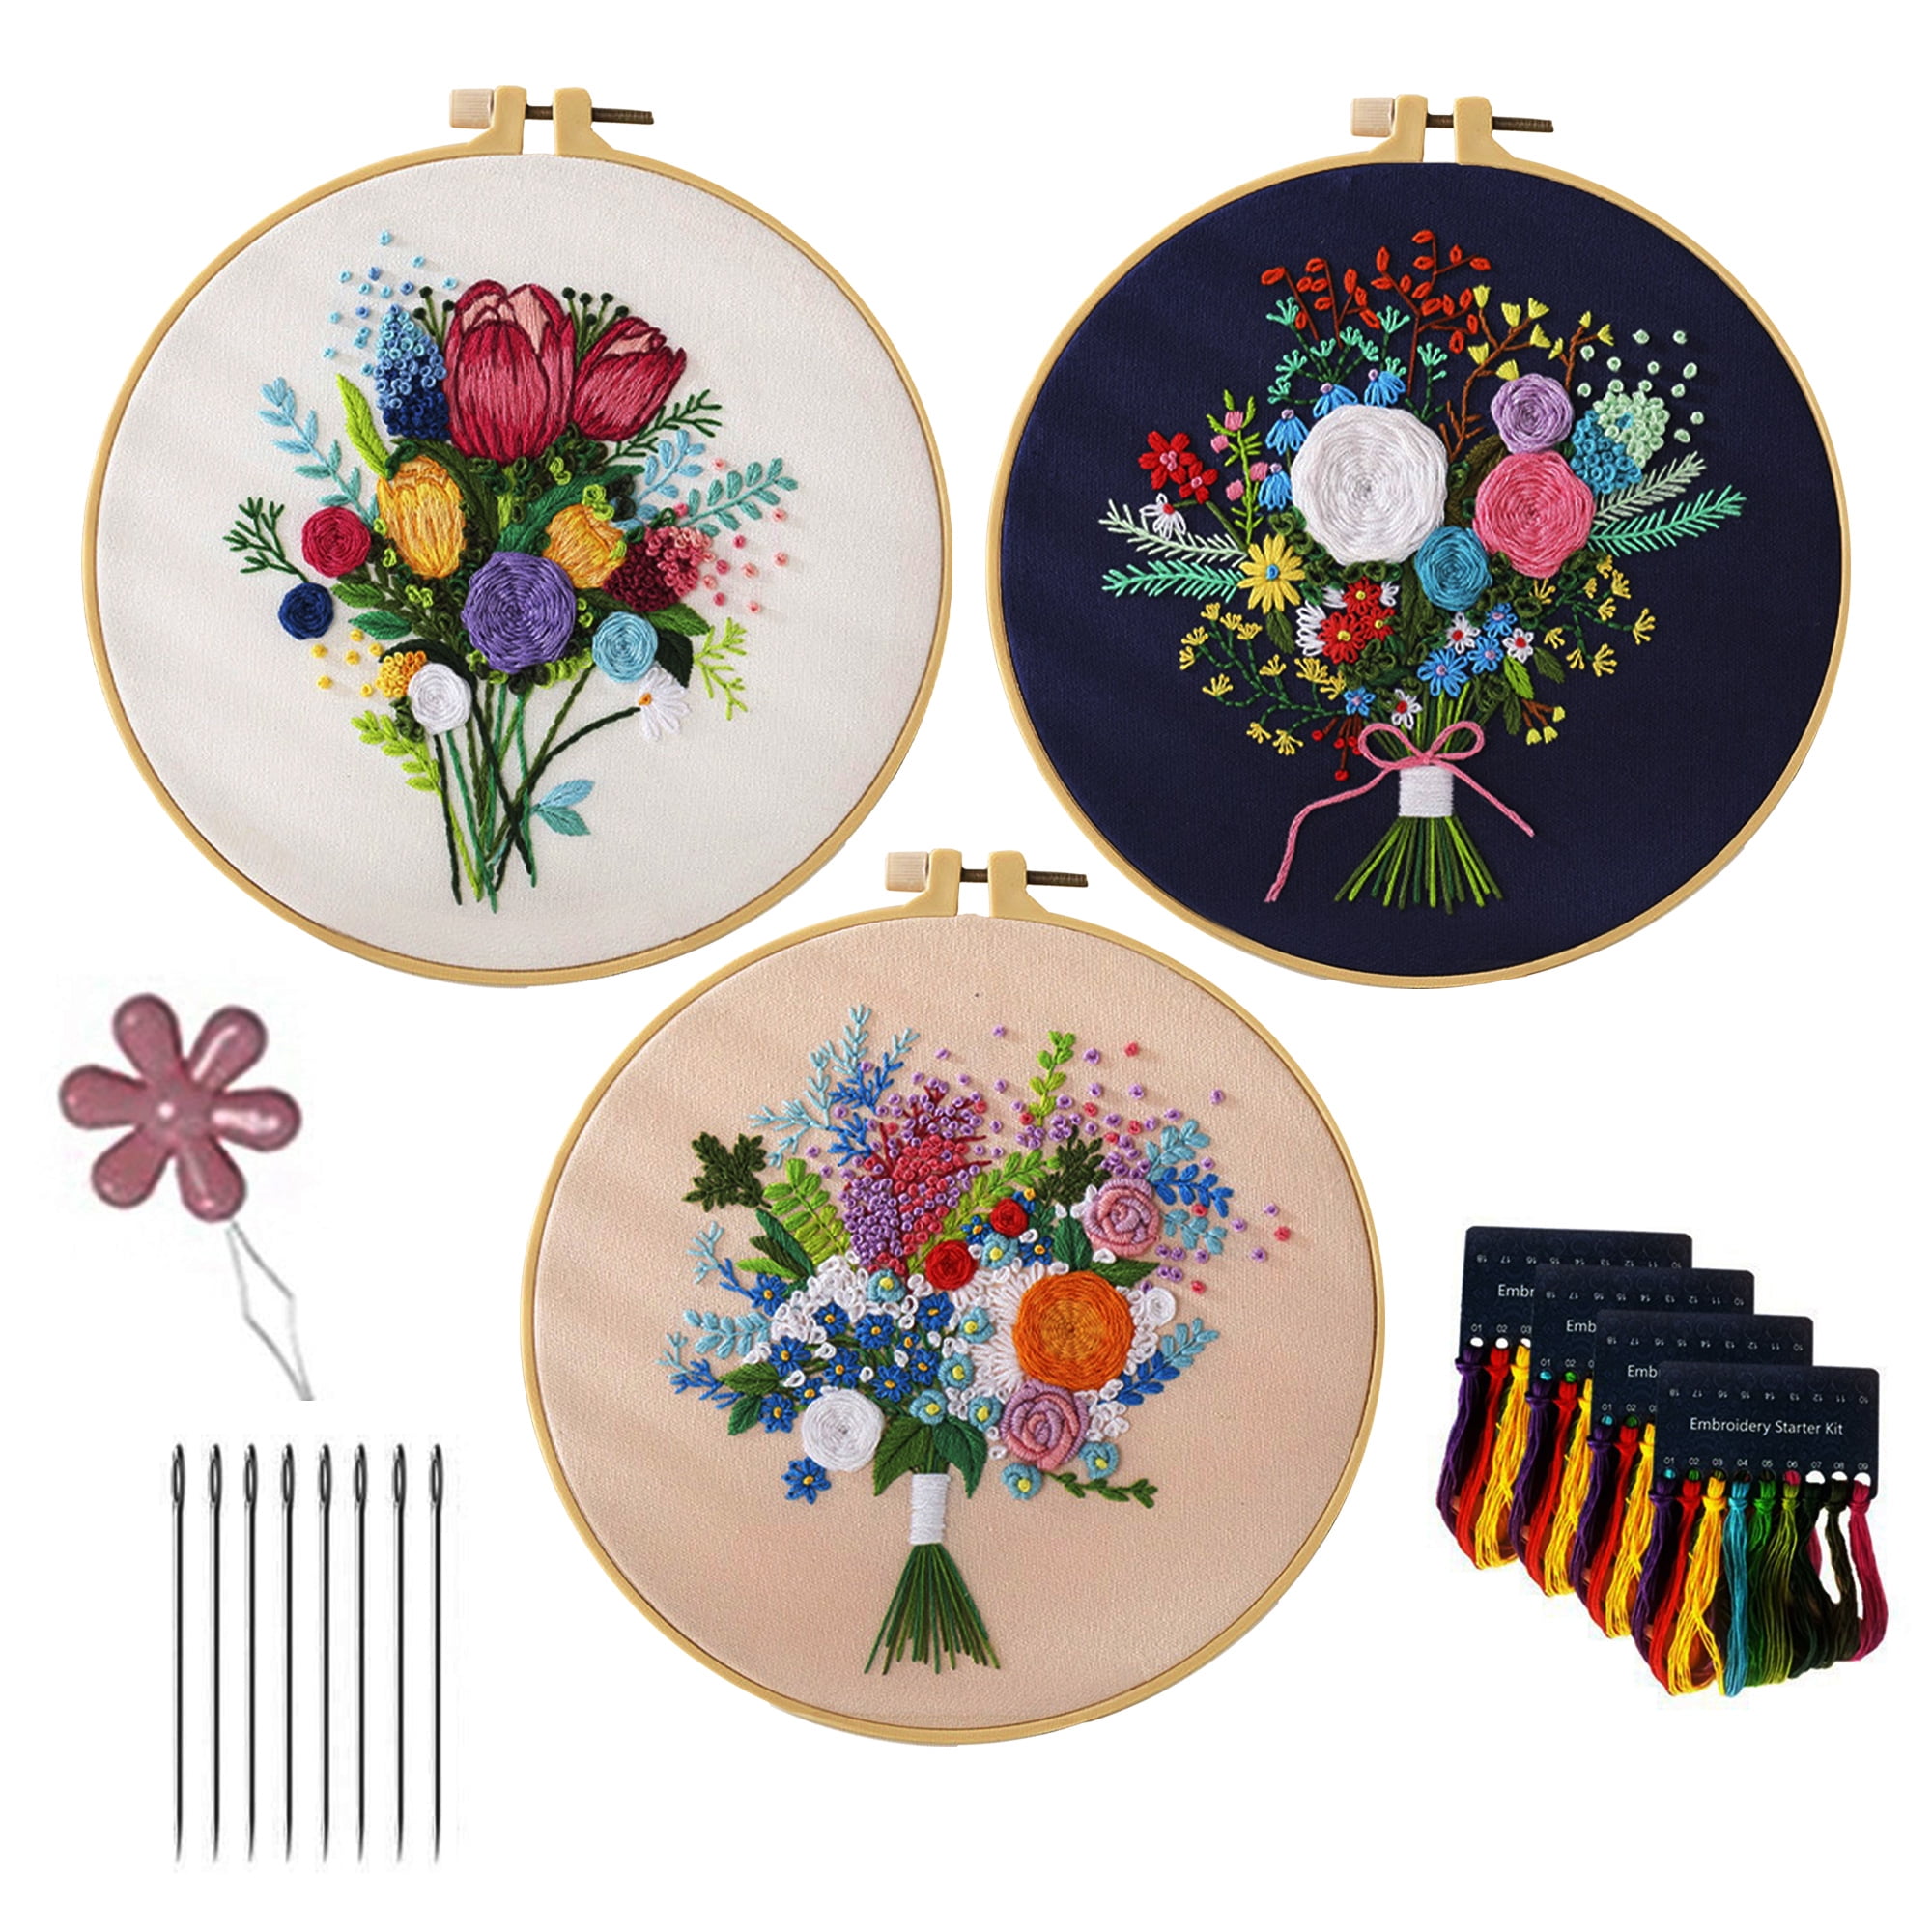 Blingpainting 3PC Handheld Flower Embroidery - Easy-to-Use, Portable,  Beautiful Designs, Embroidery Kit for Art Craft Handy Sewing, Perfect for  DIY Beginners 